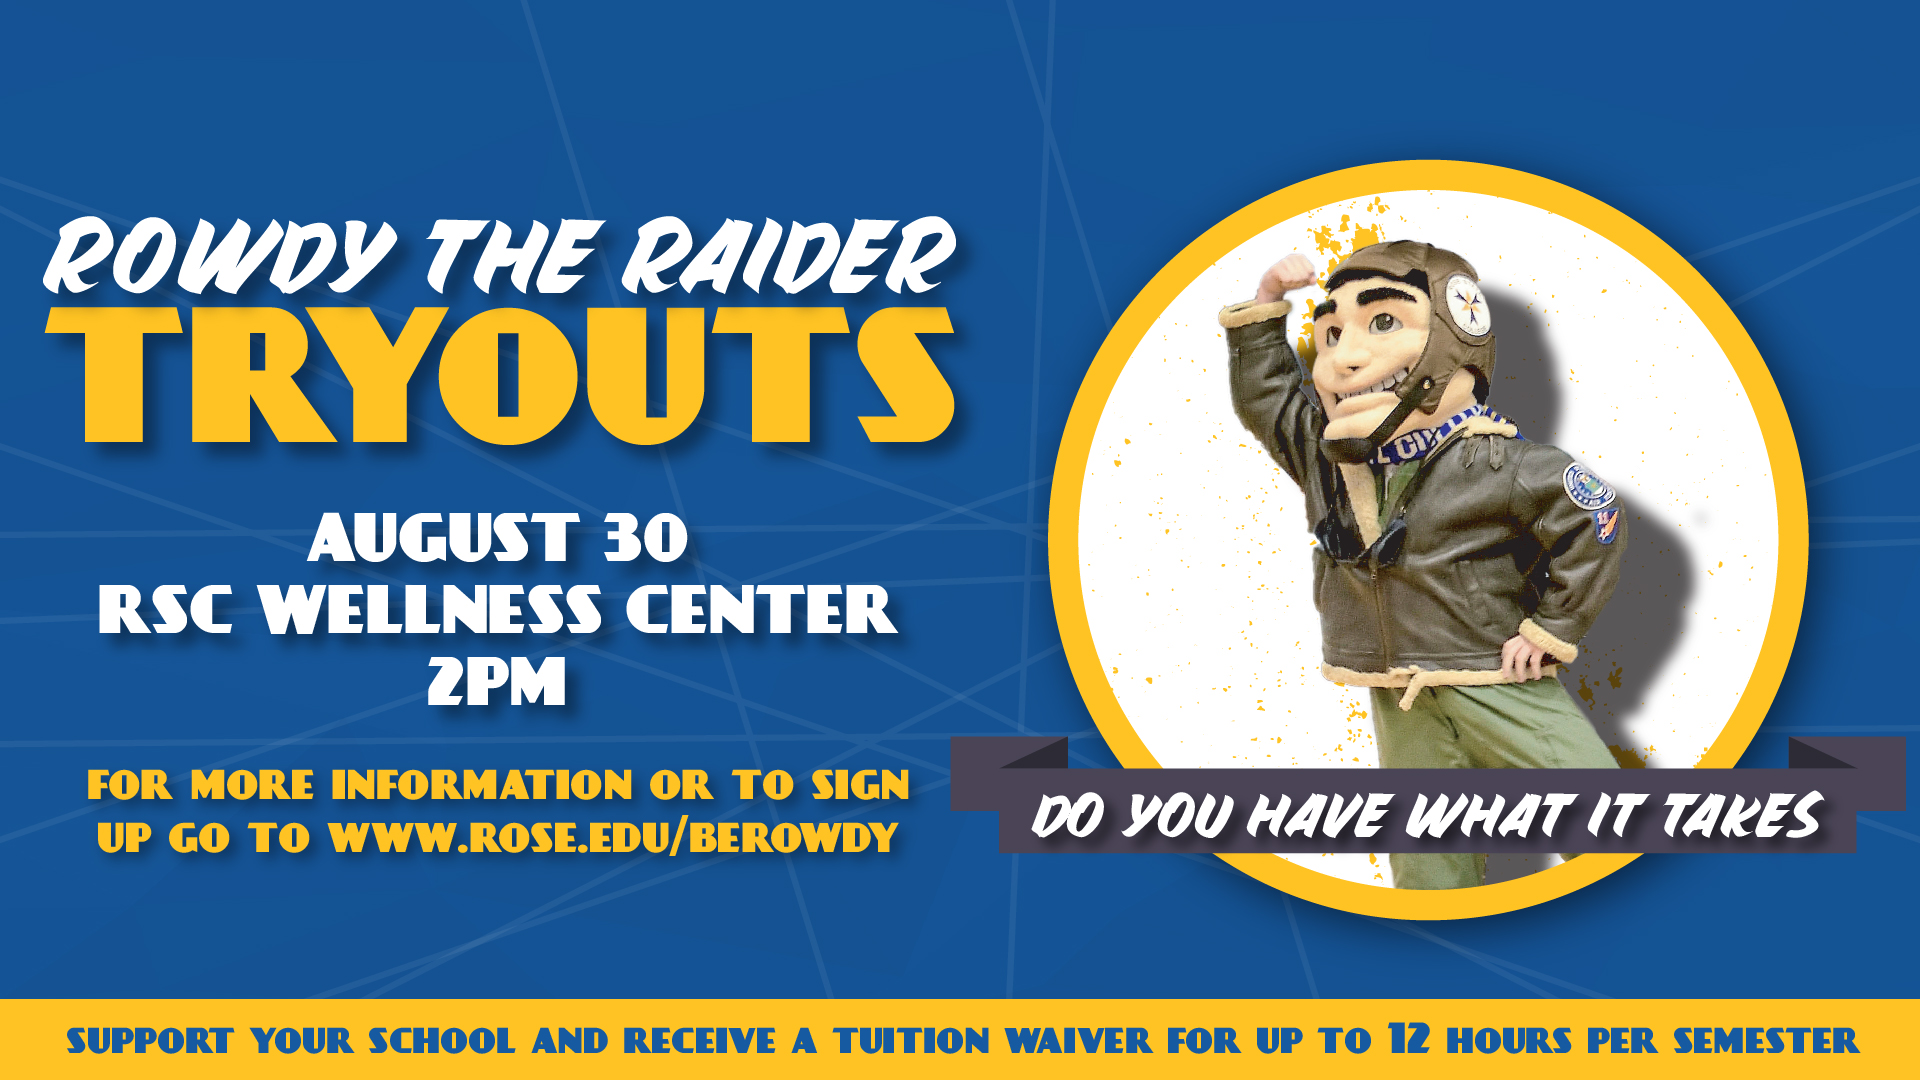 Rowdy the Raider Tryouts